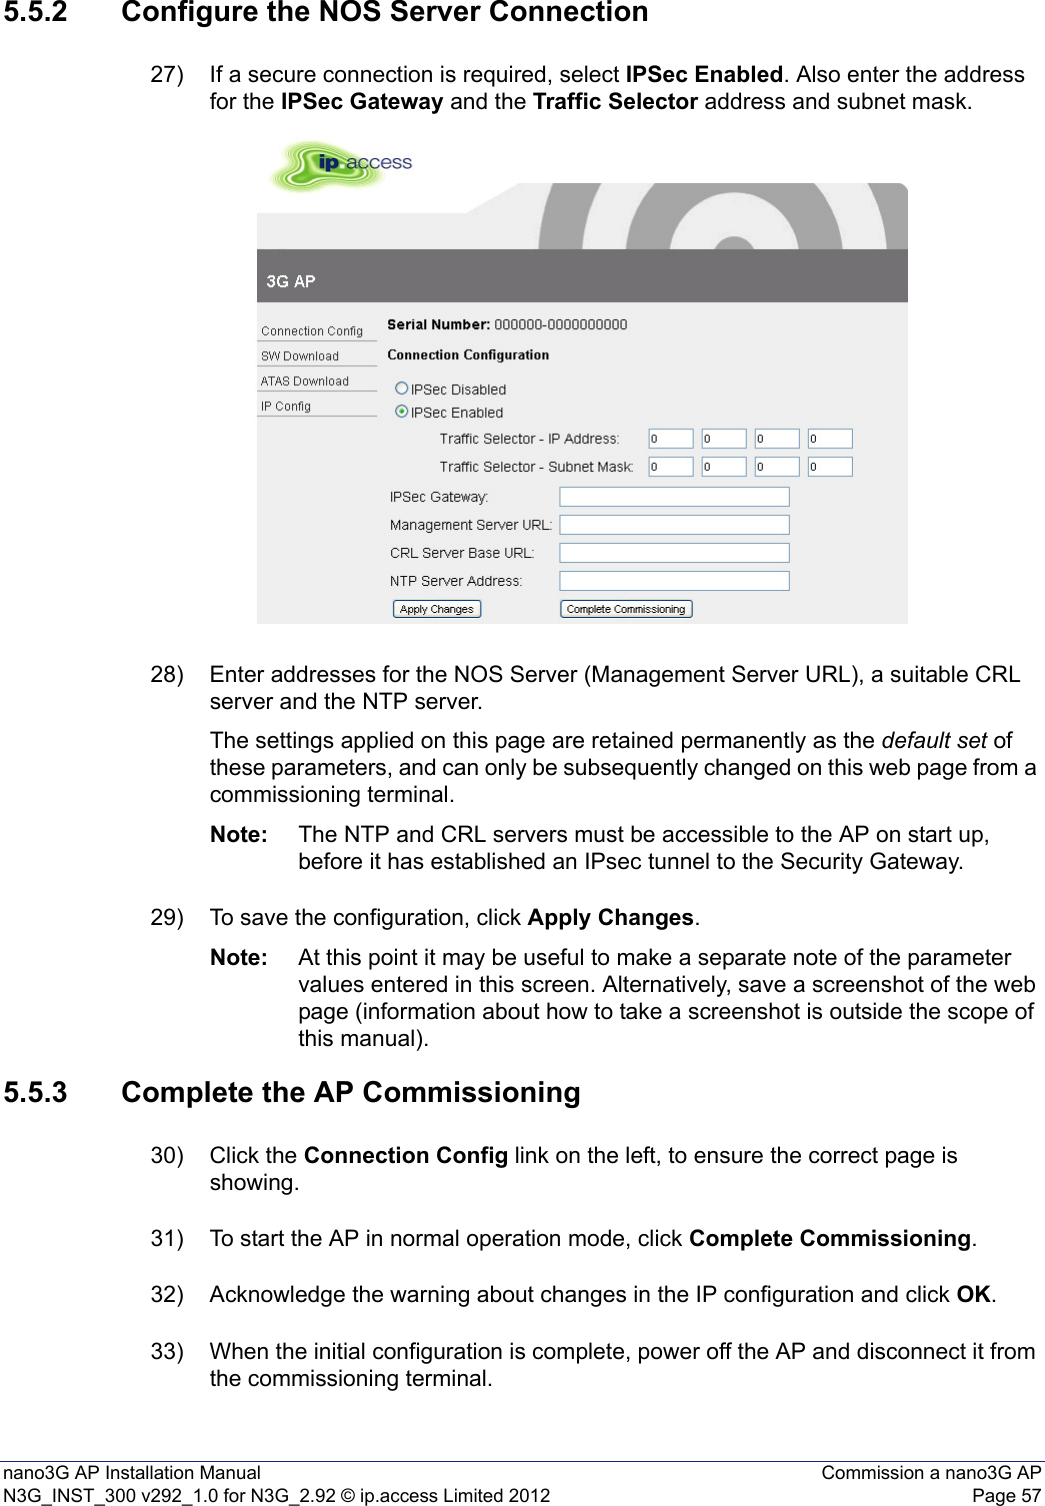 nano3G AP Installation Manual Commission a nano3G APN3G_INST_300 v292_1.0 for N3G_2.92 © ip.access Limited 2012 Page 575.5.2 Configure the NOS Server Connection27) If a secure connection is required, select IPSec Enabled. Also enter the address for the IPSec Gateway and the Traffic Selector address and subnet mask.28) Enter addresses for the NOS Server (Management Server URL), a suitable CRL server and the NTP server.The settings applied on this page are retained permanently as the default set of these parameters, and can only be subsequently changed on this web page from a commissioning terminal. Note: The NTP and CRL servers must be accessible to the AP on start up, before it has established an IPsec tunnel to the Security Gateway.29) To save the configuration, click Apply Changes.Note: At this point it may be useful to make a separate note of the parameter values entered in this screen. Alternatively, save a screenshot of the web page (information about how to take a screenshot is outside the scope of this manual).5.5.3 Complete the AP Commissioning30) Click the Connection Config link on the left, to ensure the correct page is showing.31) To start the AP in normal operation mode, click Complete Commissioning.32) Acknowledge the warning about changes in the IP configuration and click OK.33) When the initial configuration is complete, power off the AP and disconnect it from the commissioning terminal. 